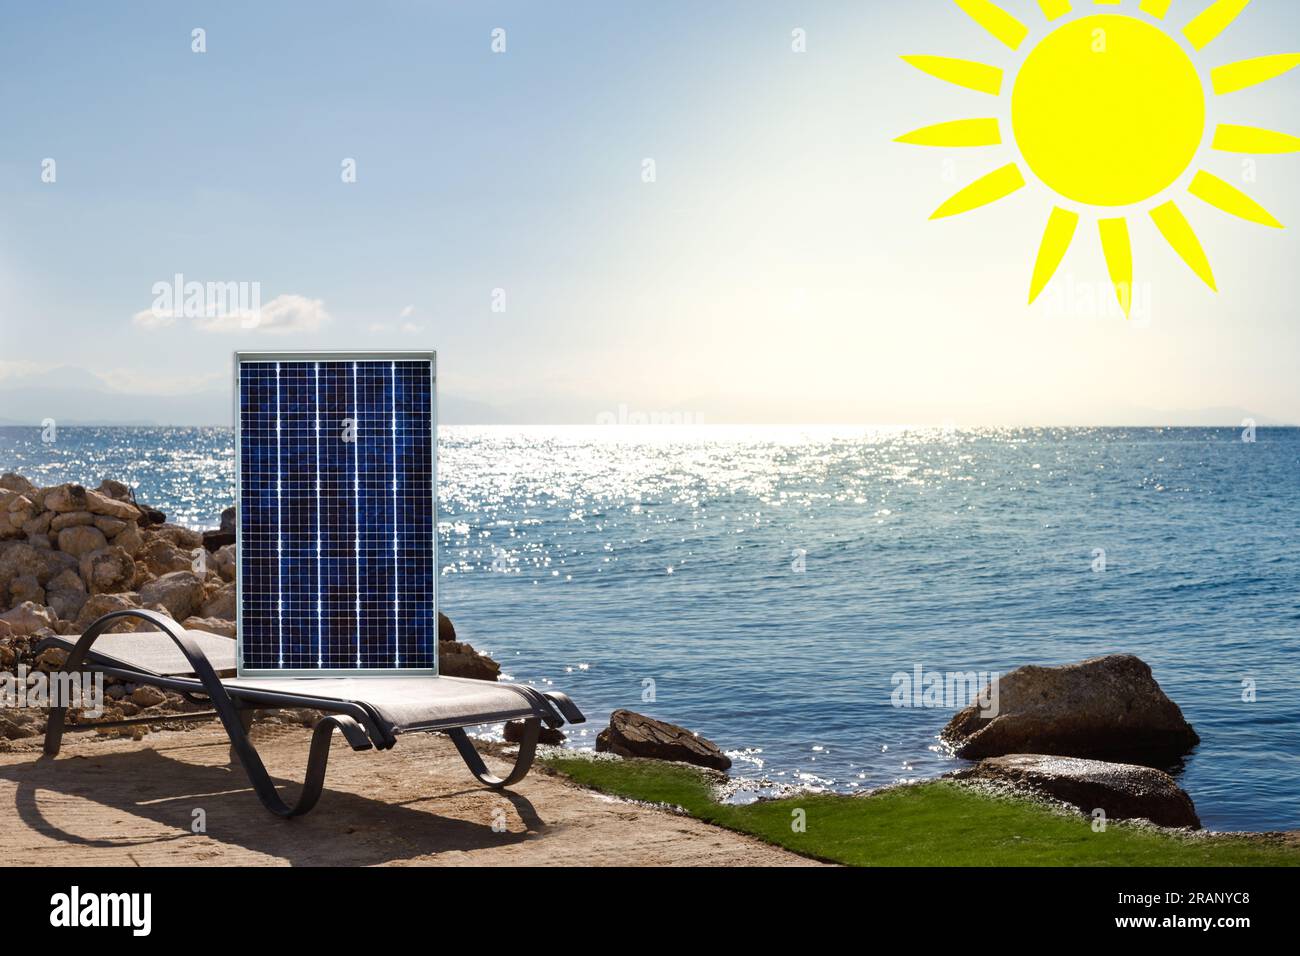 Leisure and renewable energy, solar panels. Conceptual image. Sustainable environment Stock Photo